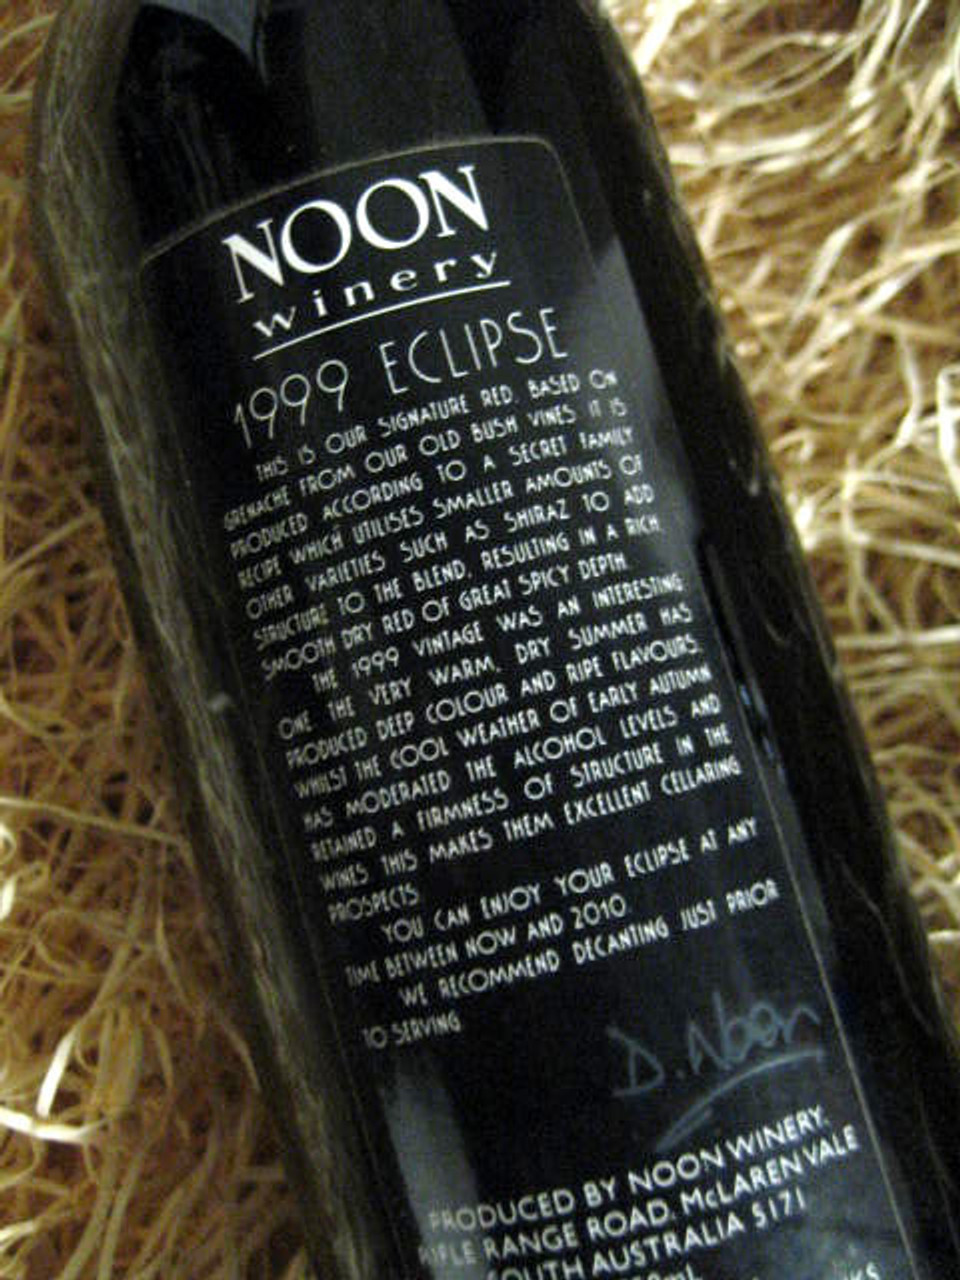 NOON winery ECLIPSE 2005 - 飲料・酒